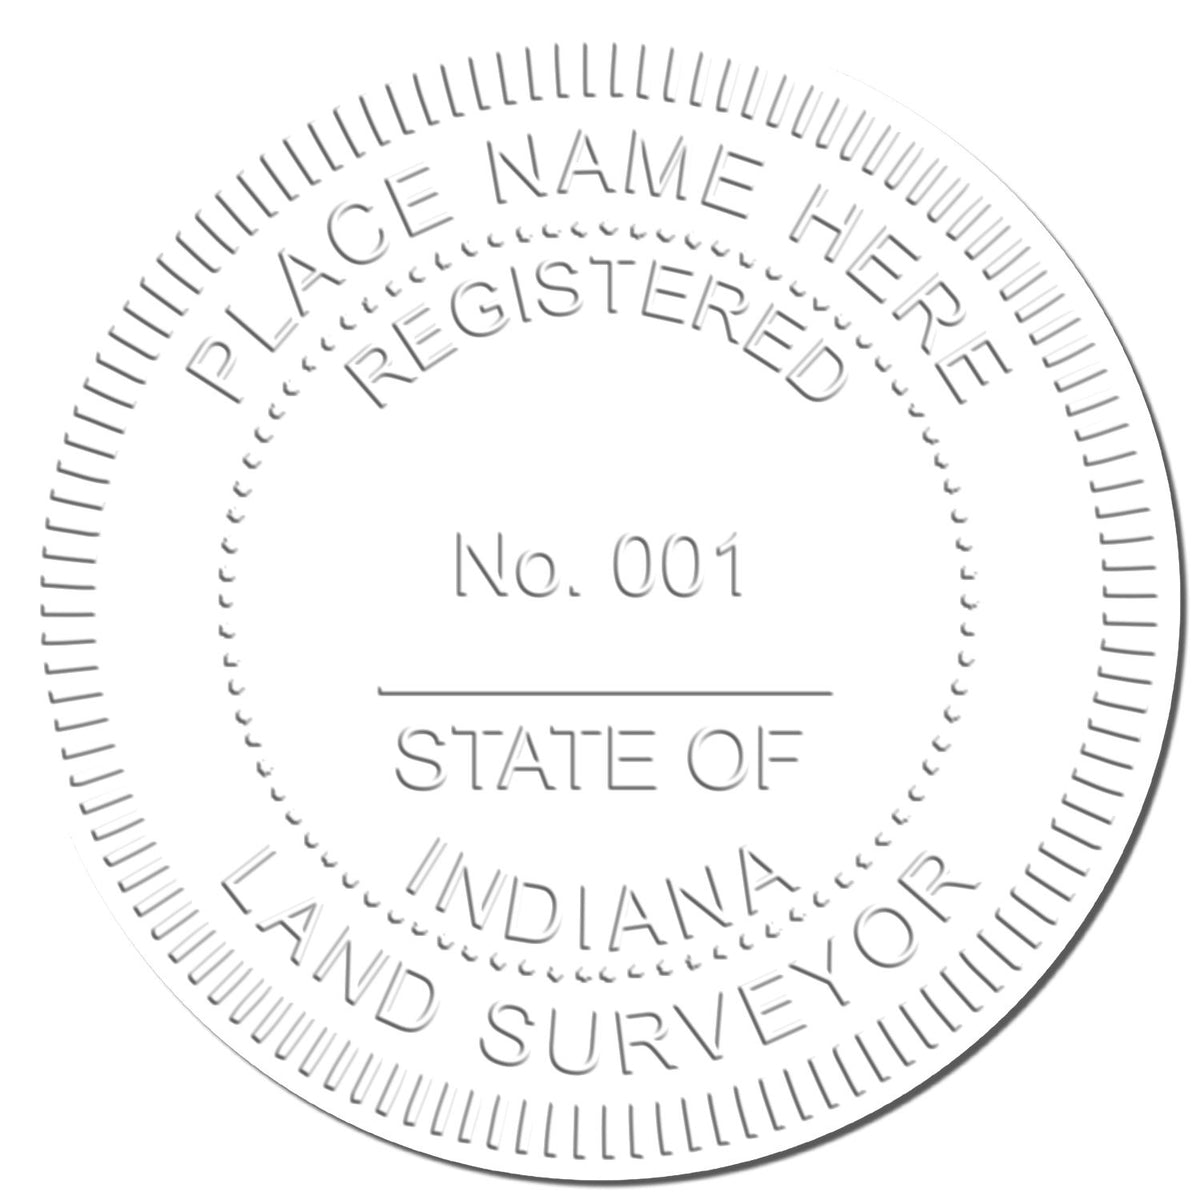 This paper is stamped with a sample imprint of the Long Reach Indiana Land Surveyor Seal, signifying its quality and reliability.